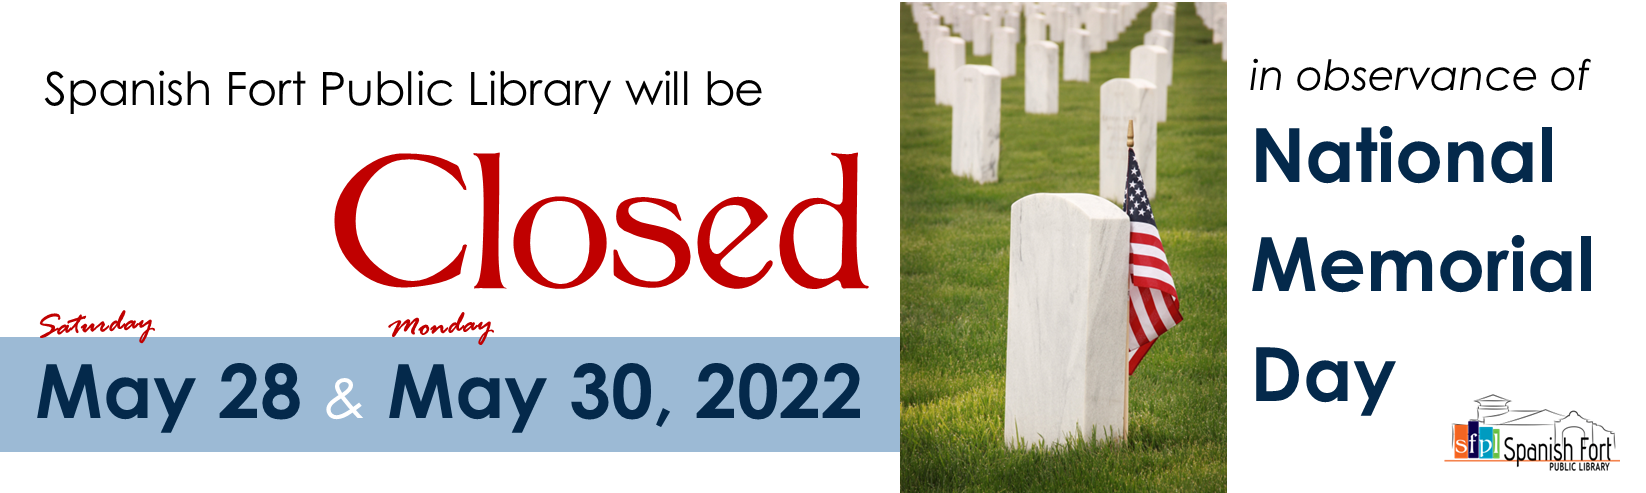 Spanish Fort Public Library will be closed Saturday May 28, 2022 and Monday, May 30, 2021 in observance of National Memorial Day 2022